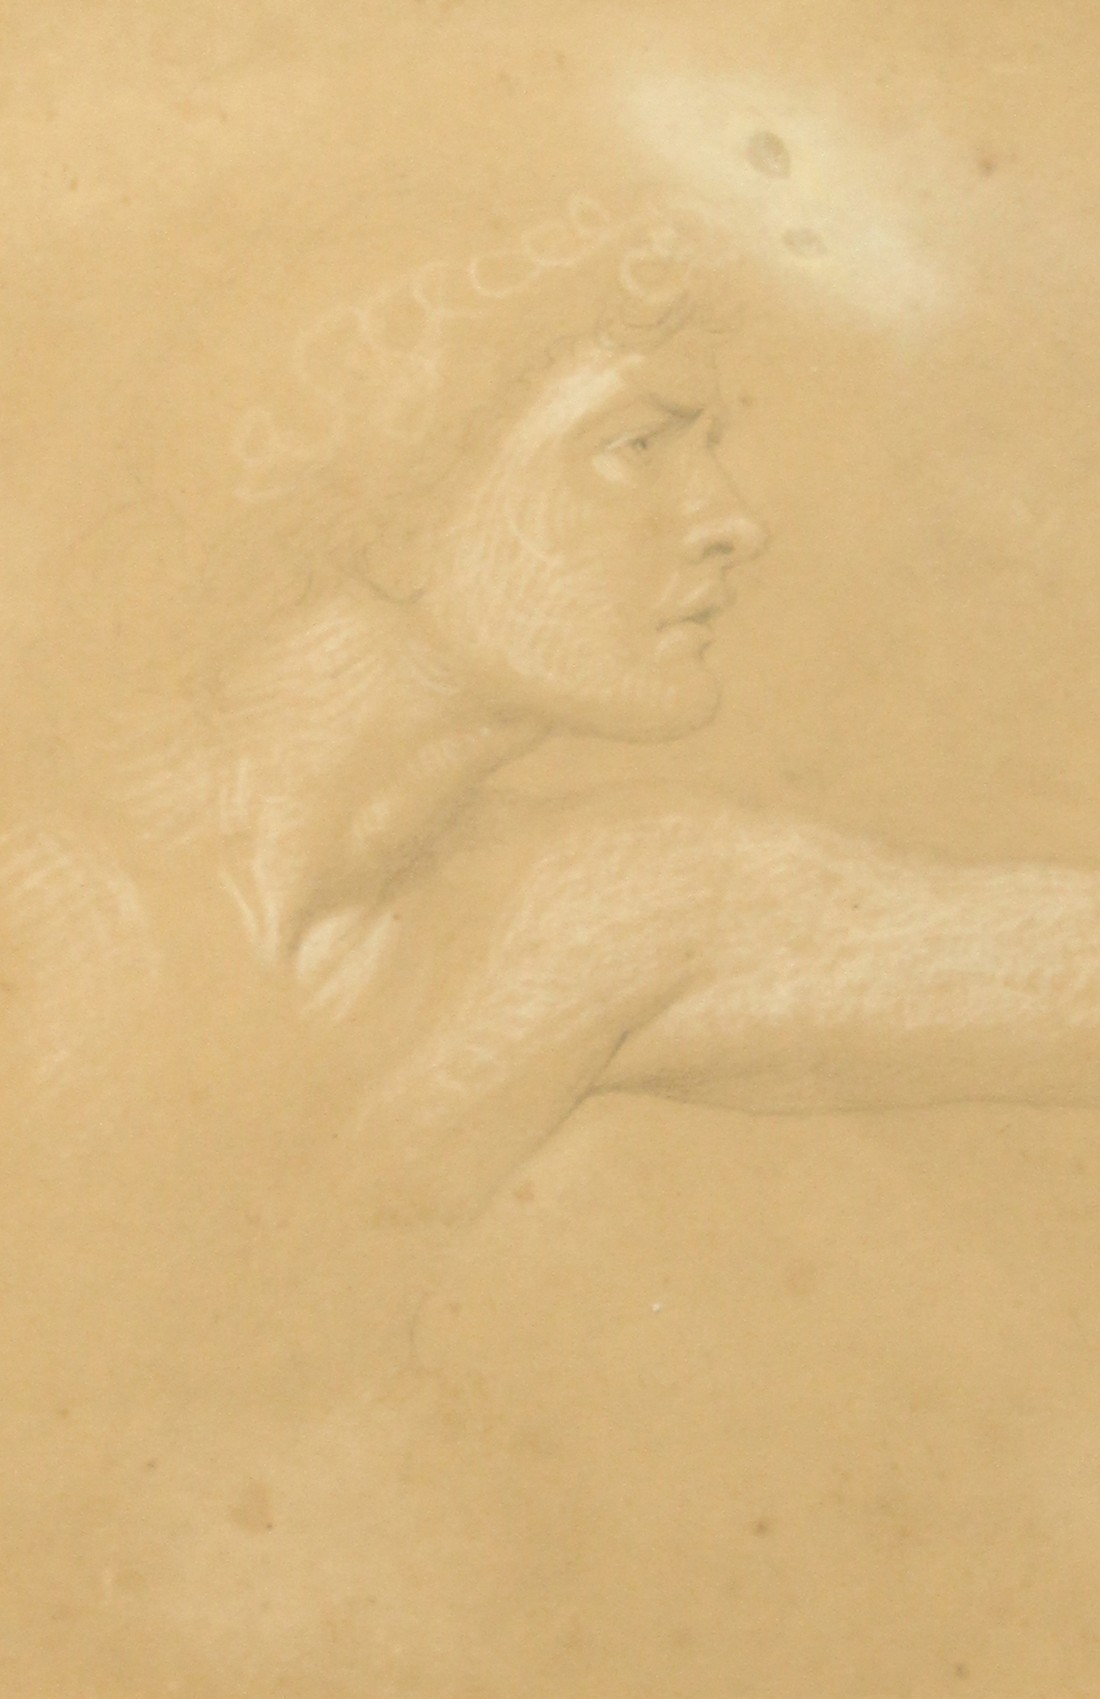 Attributed to Evelyn de Morgan (1855-1919) British, A study of a classical figure, chalk and crayon,